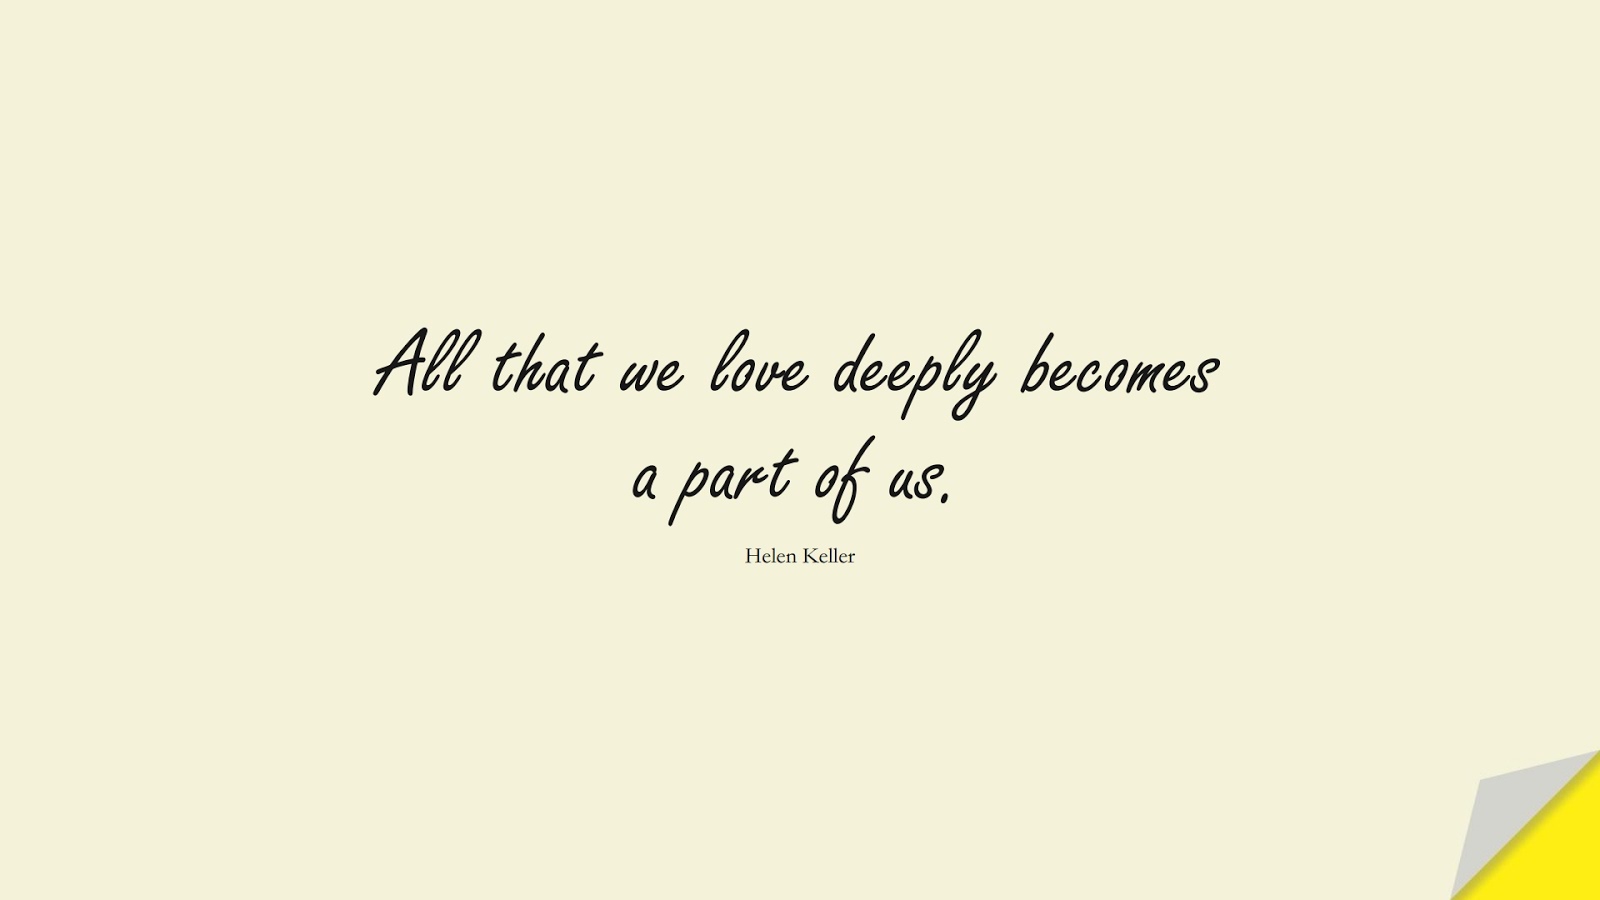 All that we love deeply becomes a part of us. (Helen Keller);  #LoveQuotes